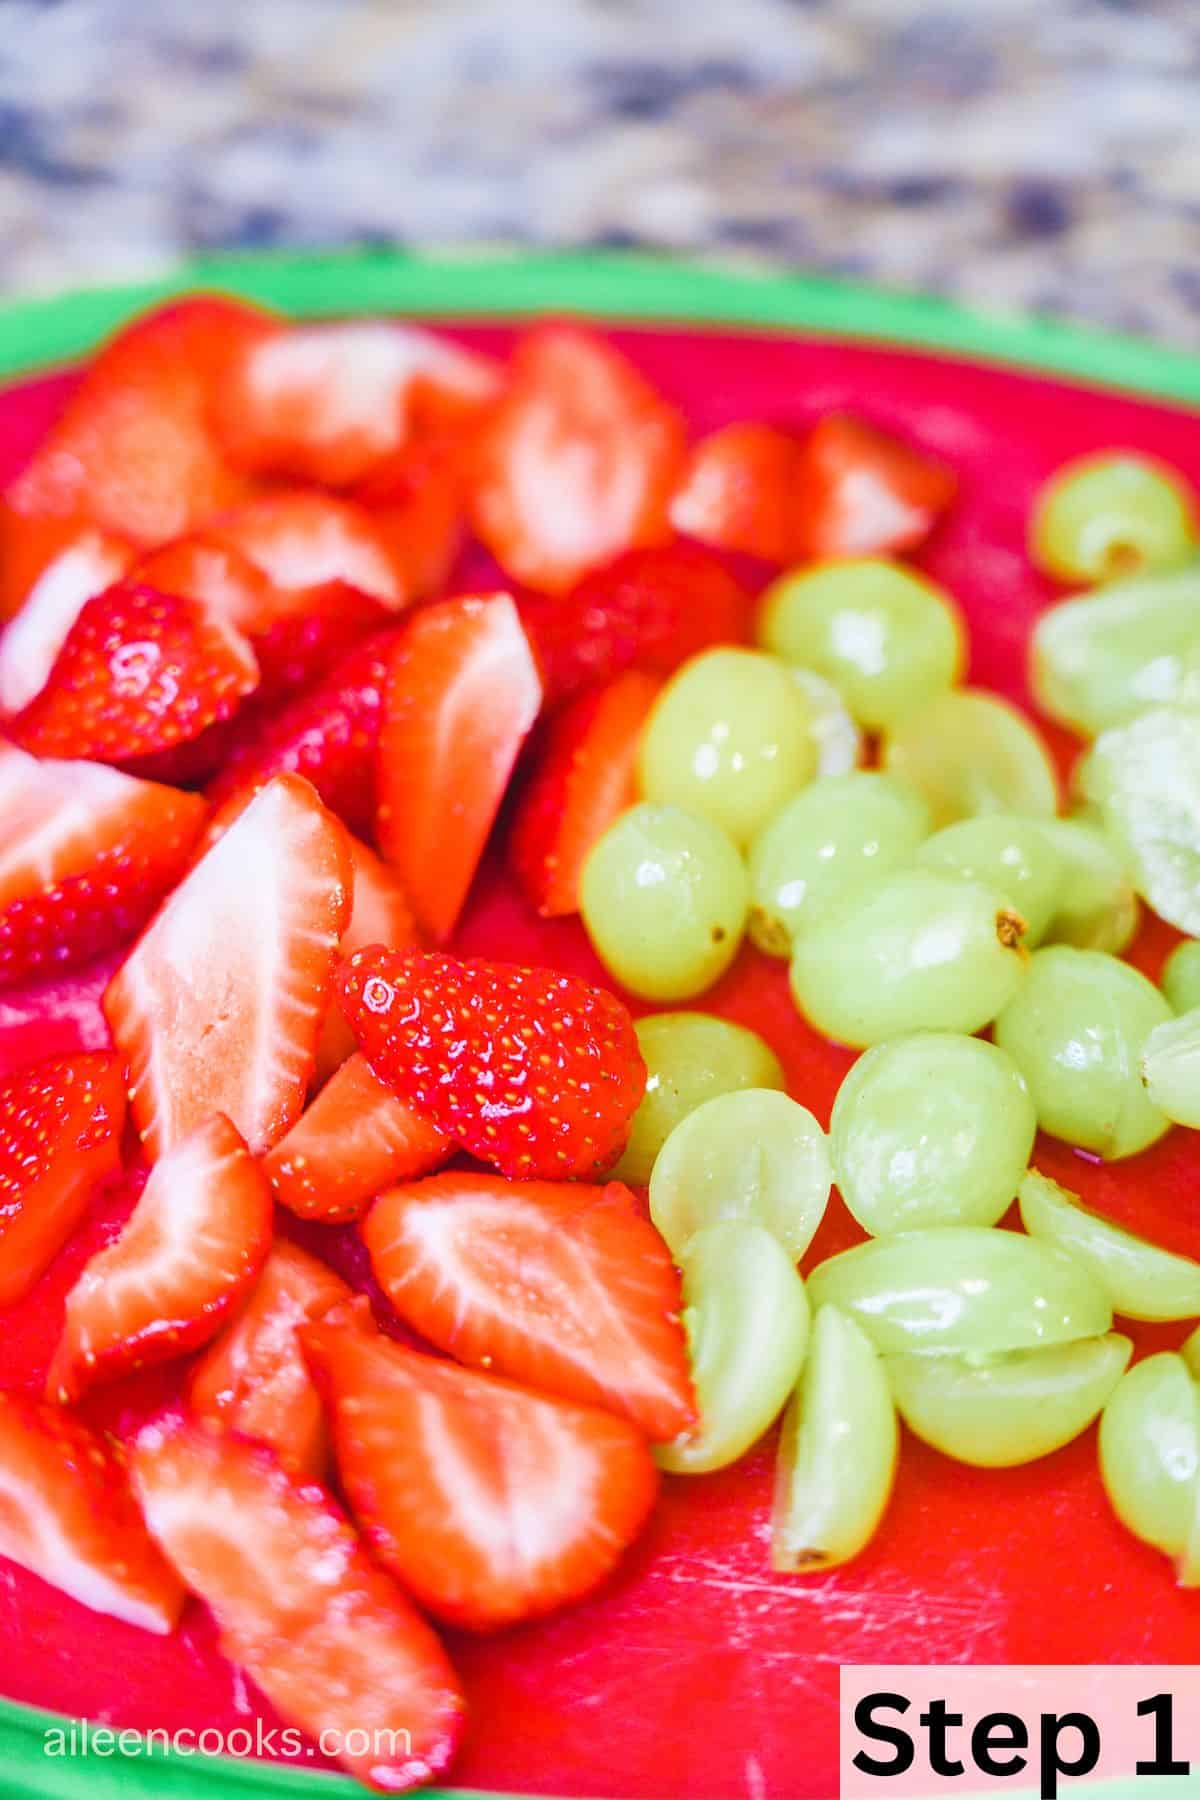 A red cutting board filled with sliced strawberries and green grapes.